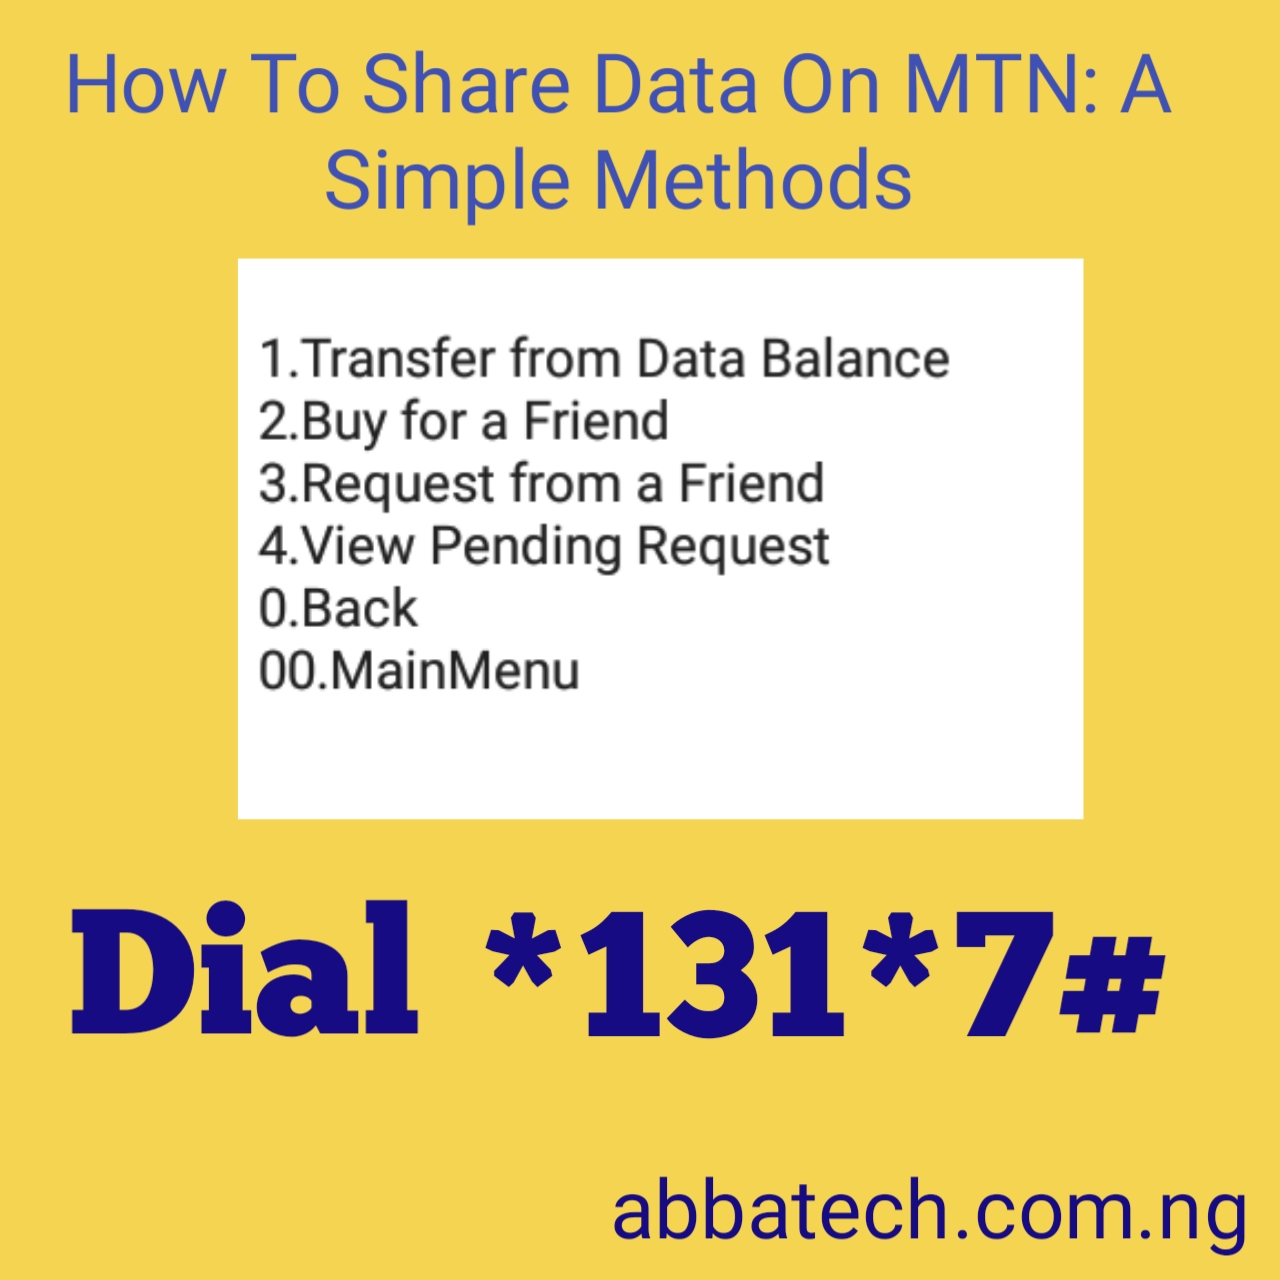 How To Share Data On MTN: A Simple Methods 2022